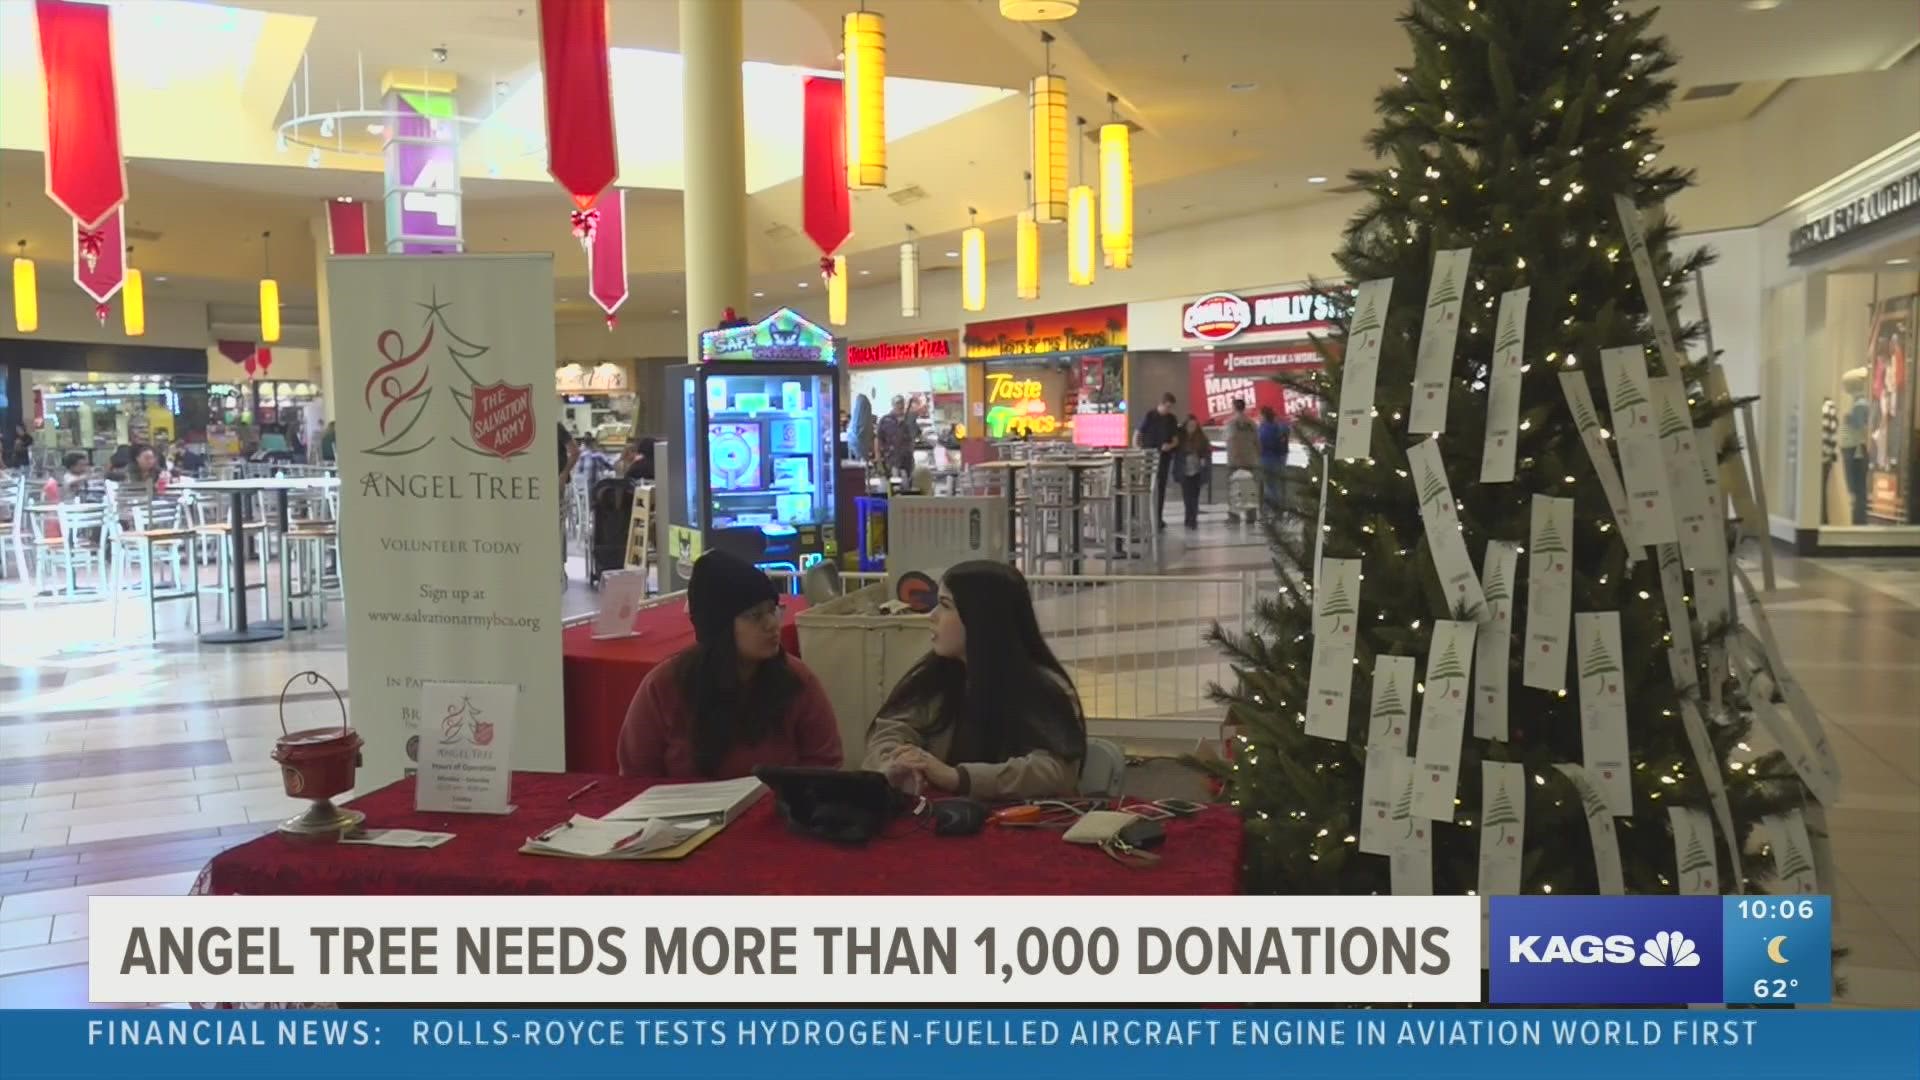 With two weeks to go in their angel tree program, the Salvation Army is still looking for over 1,000 donations to meet their goal.